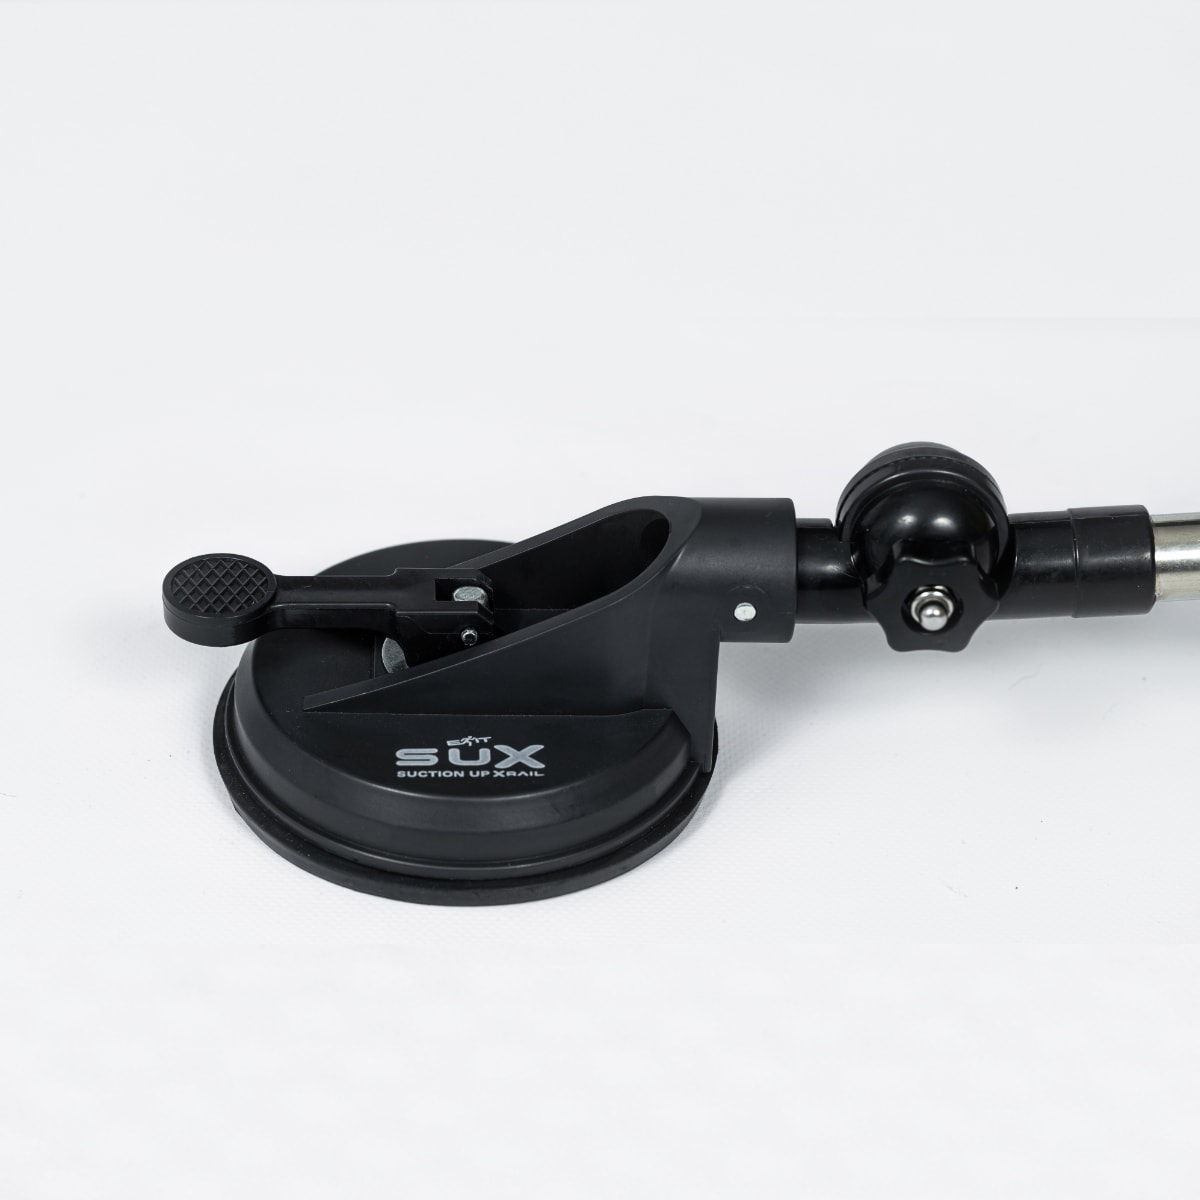 SUX for XRail Wetsuit Hanger by Exit Watersports